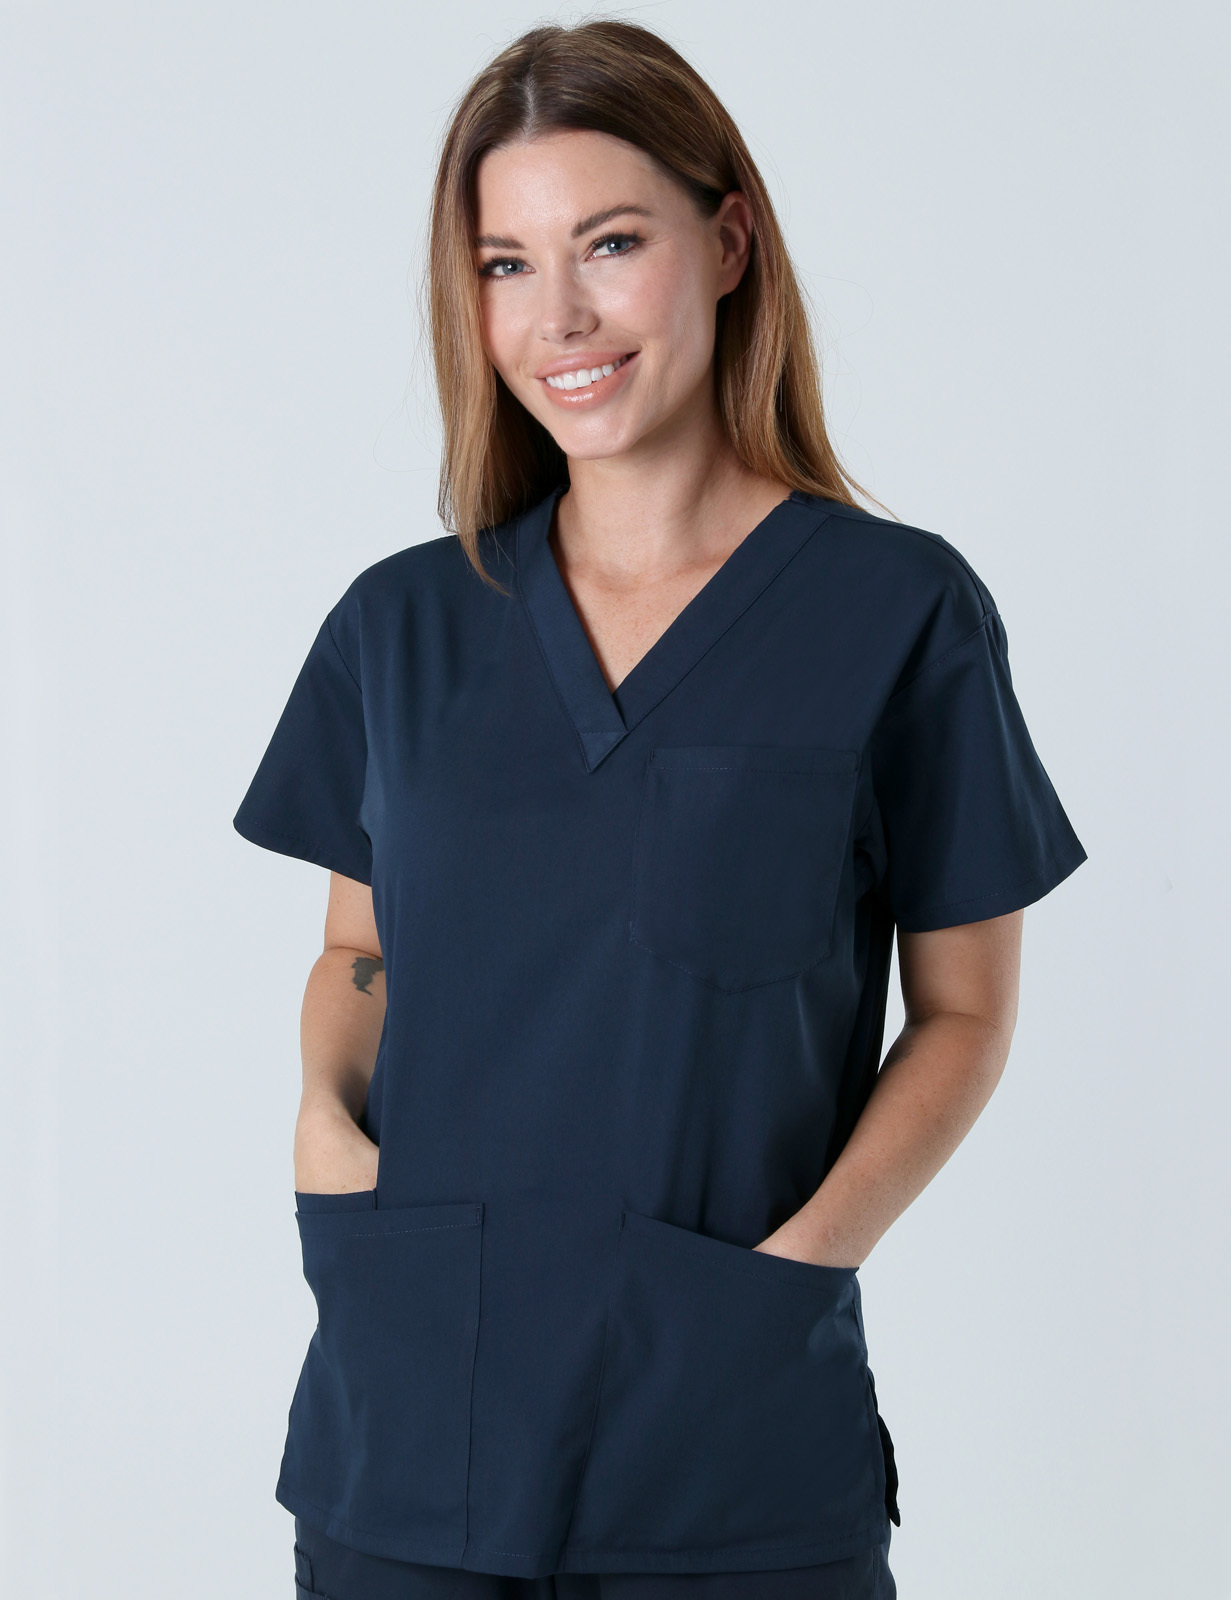 Cairns Base Hospital - Doctor (4 Pocket Scrub Top and Cargo Pants in Navy incl Logos)